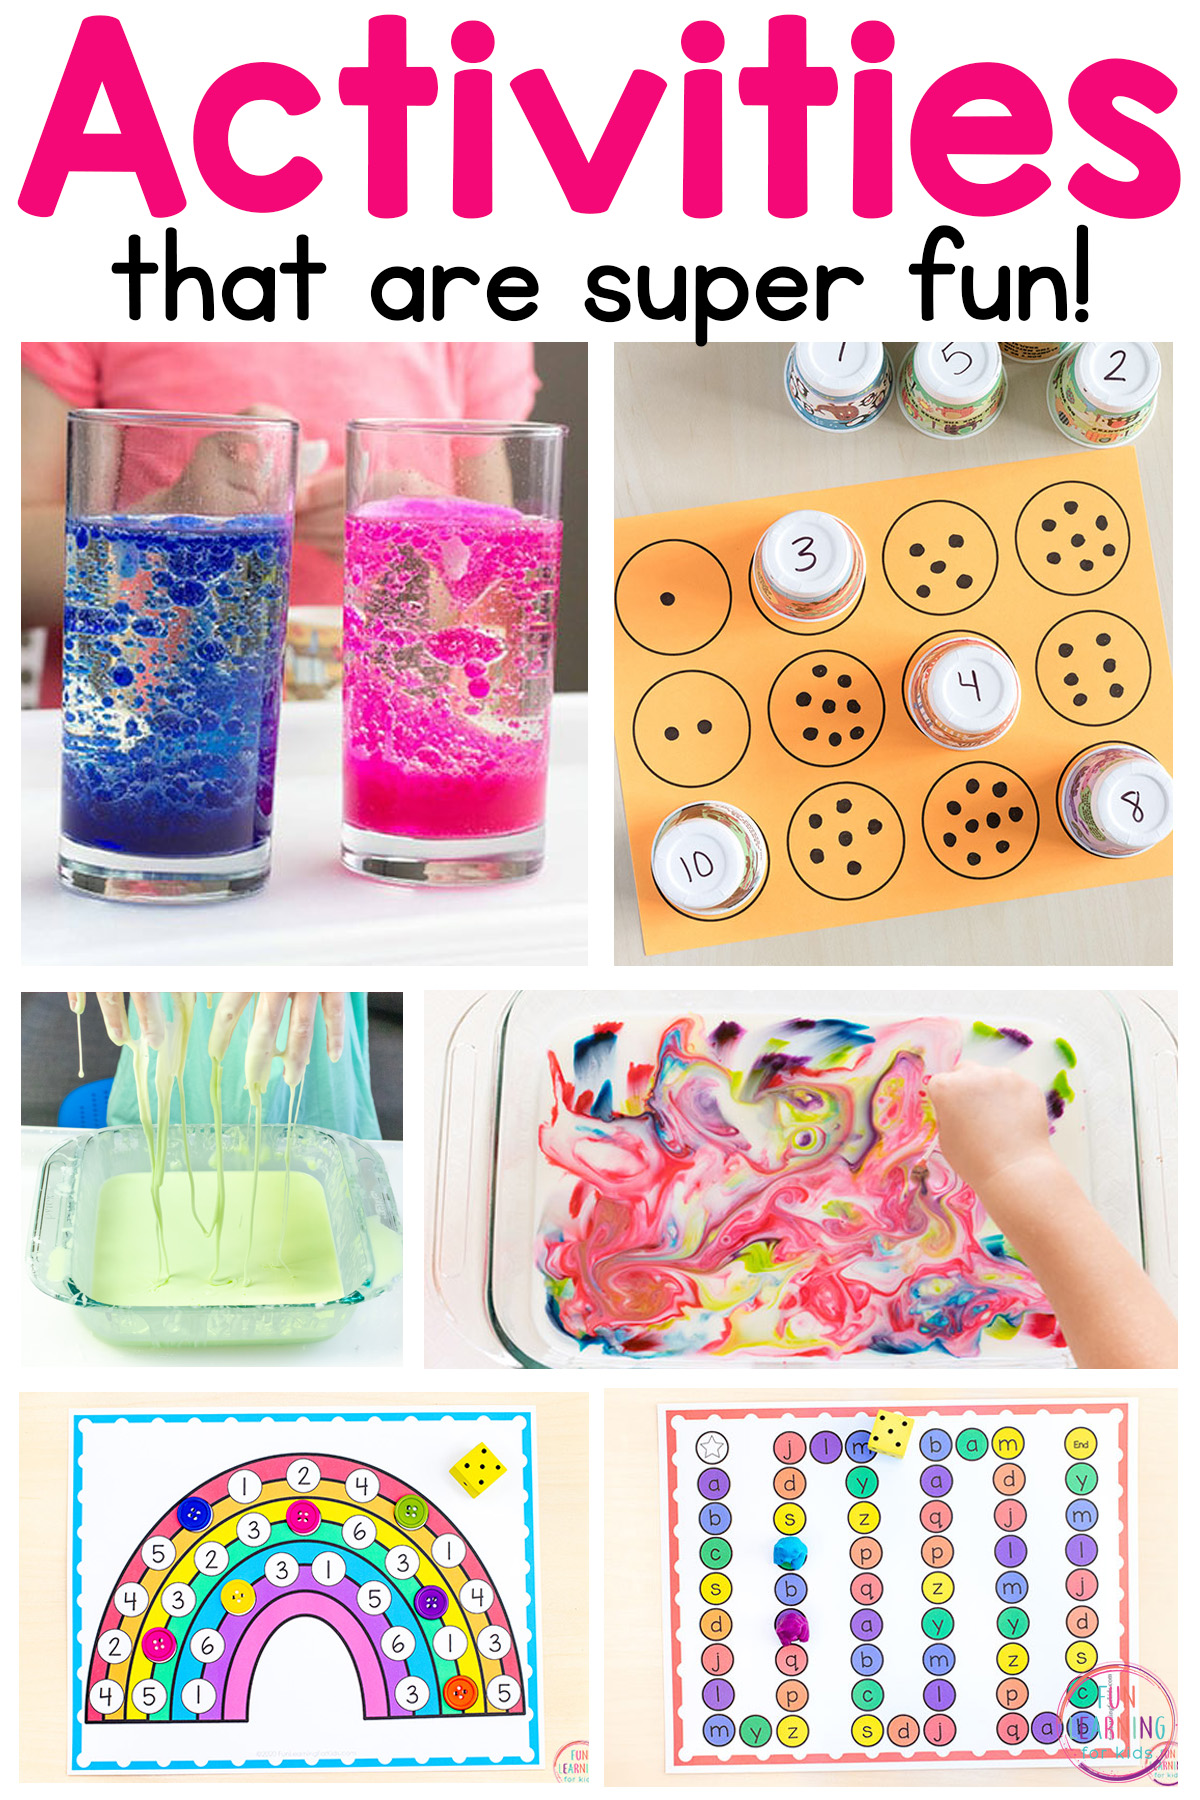 5 Fun and Educational Activities for Kindergarteners Ages 5-6 To Enjoy ...